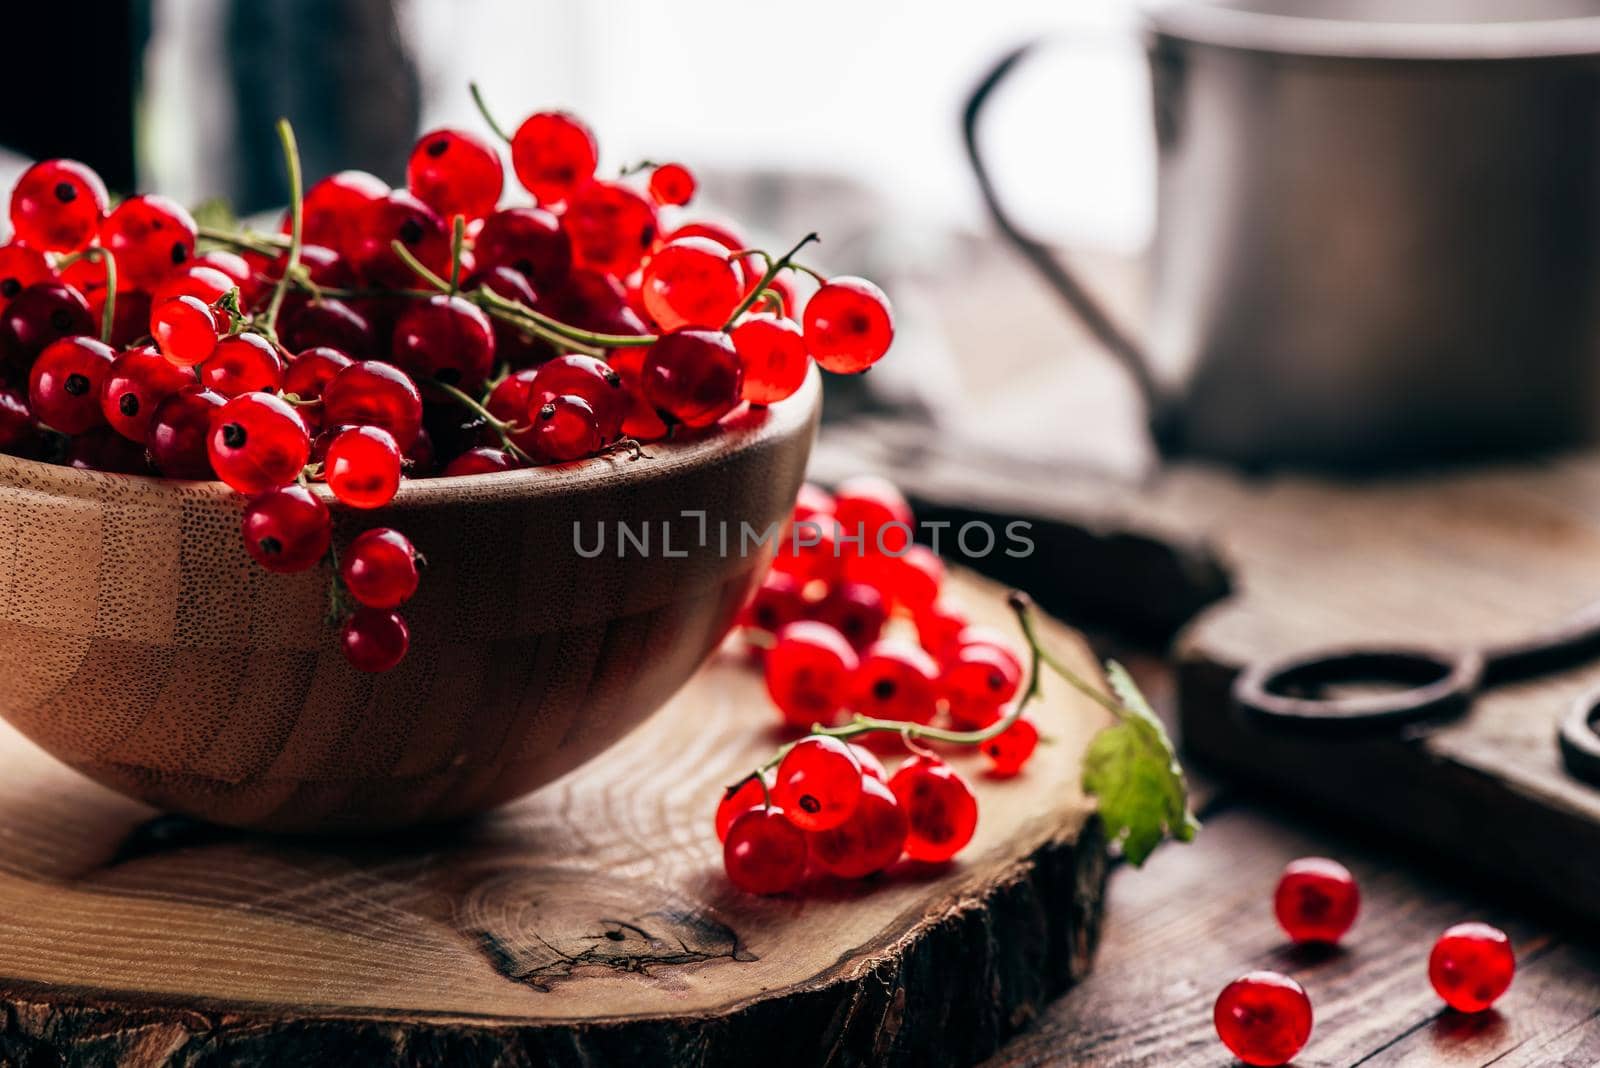 Fresh picked red currants in wooden bowl